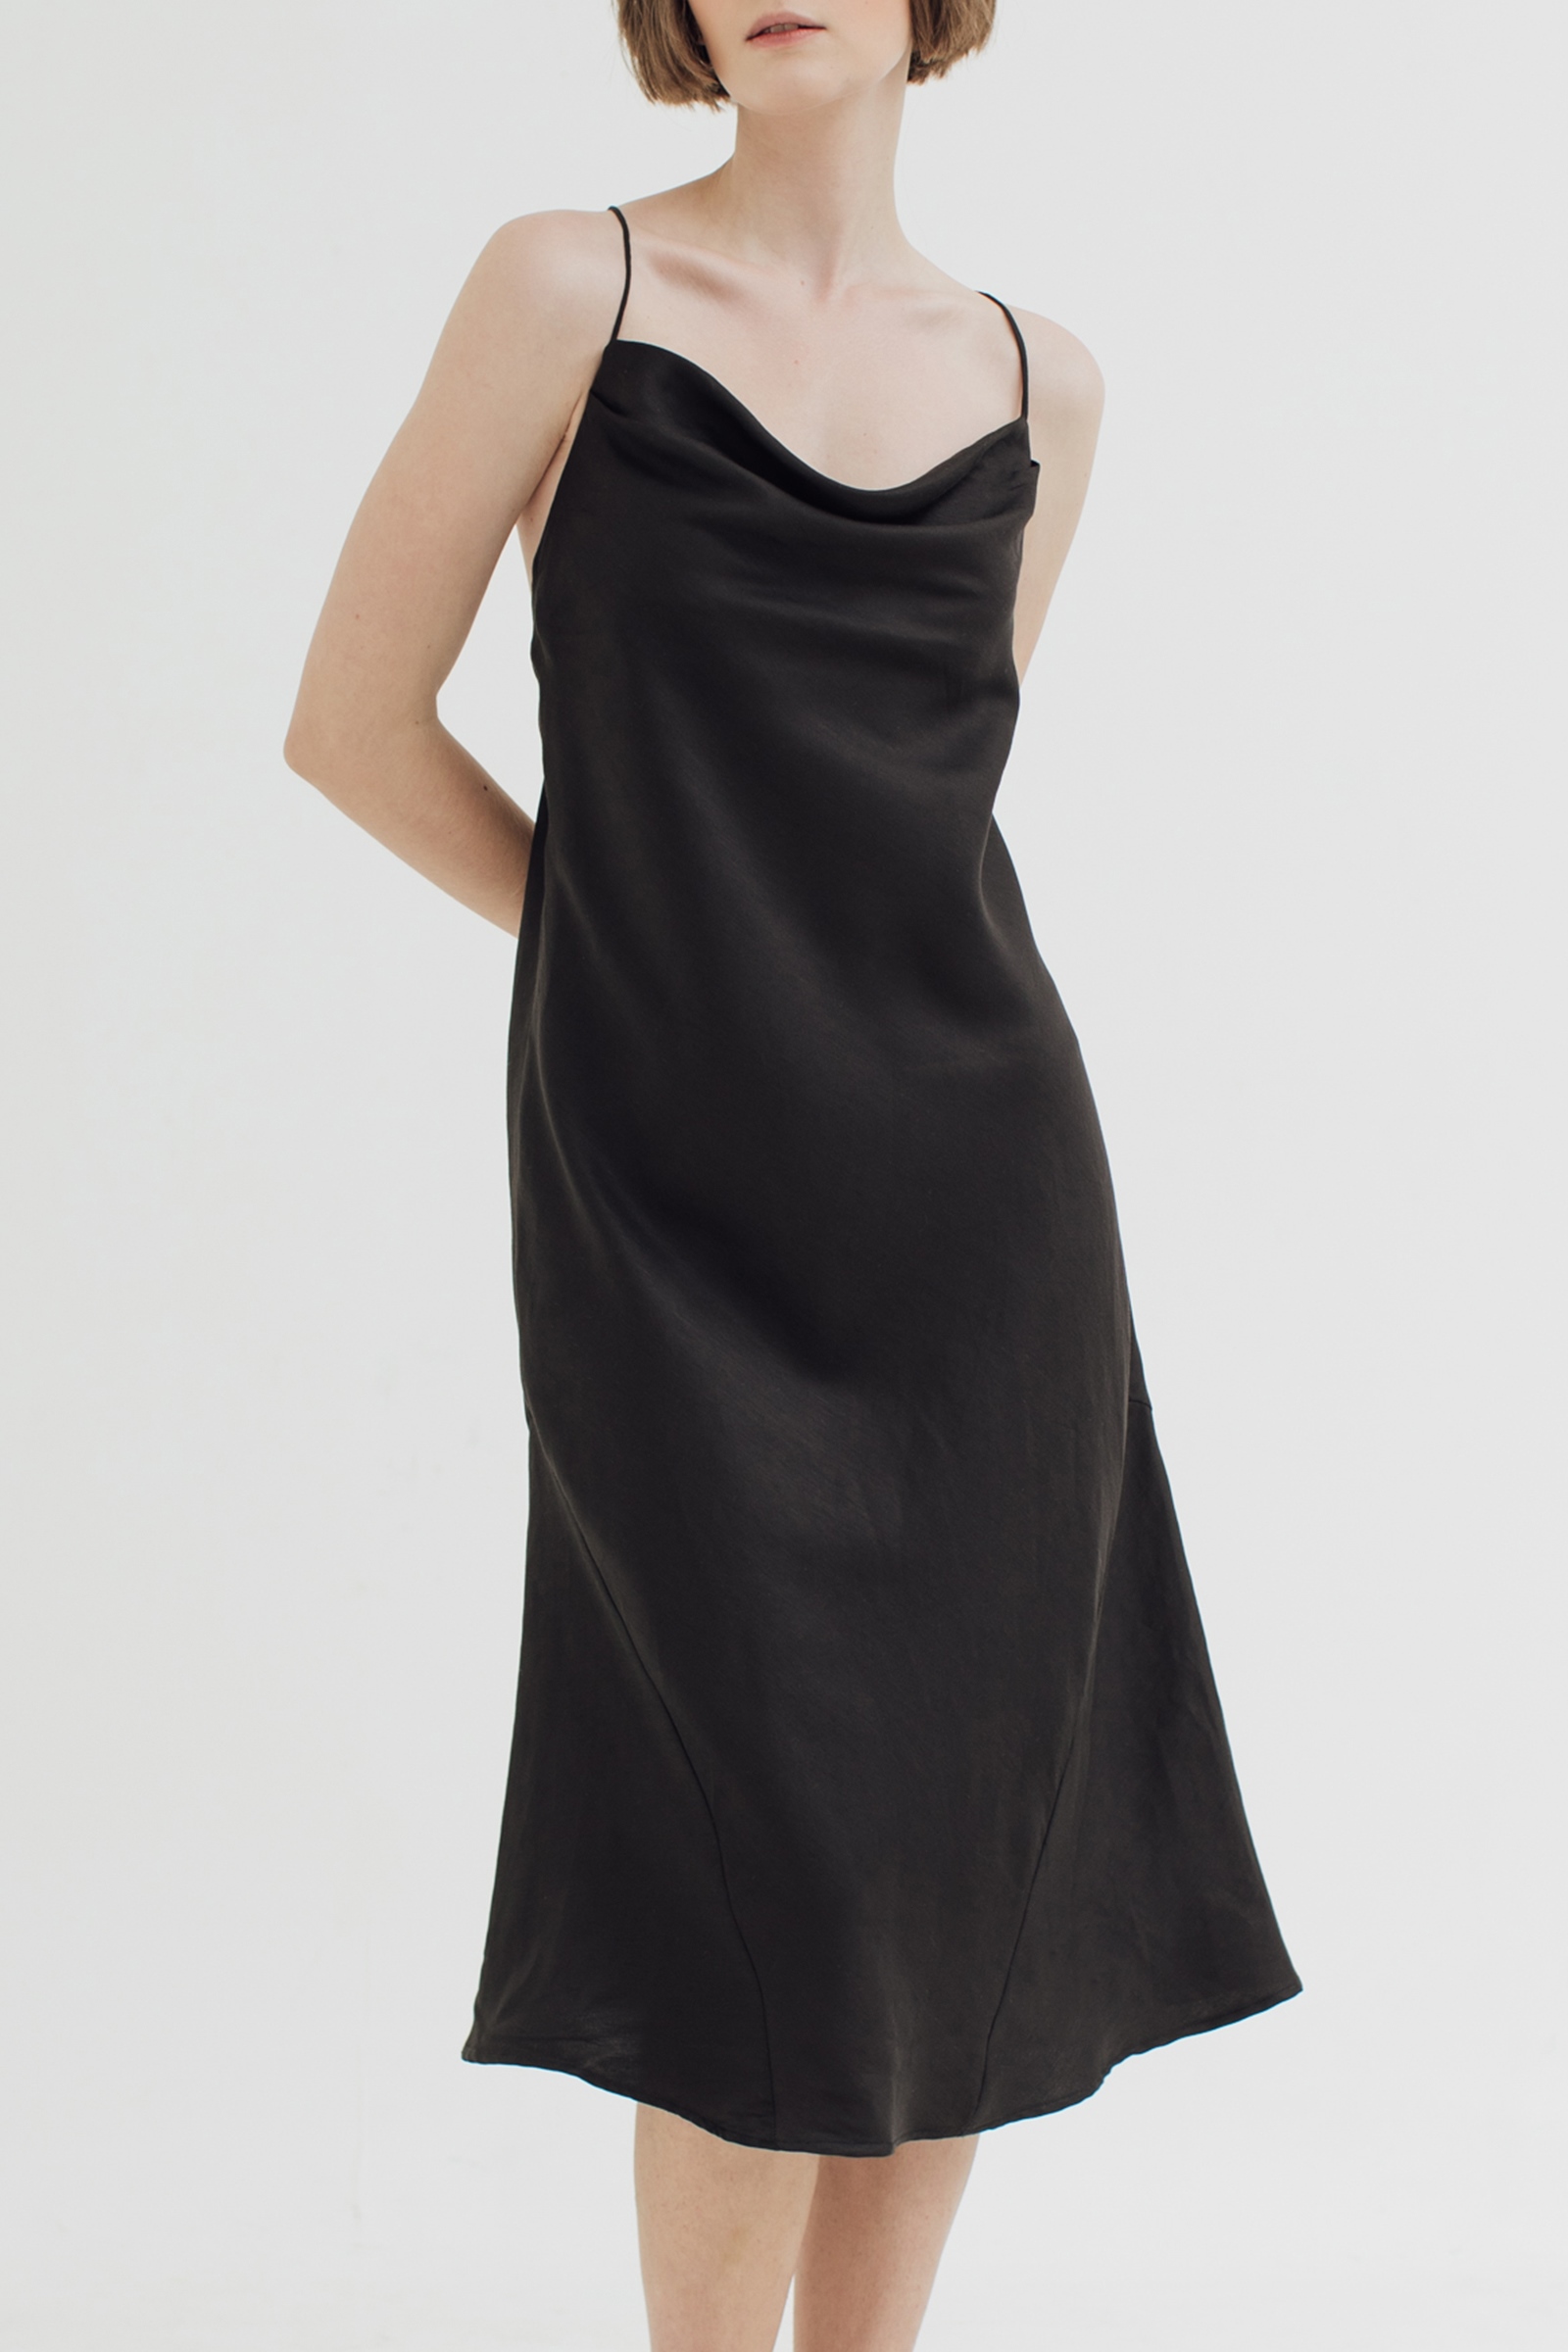 Picture of Sorin Dress Black